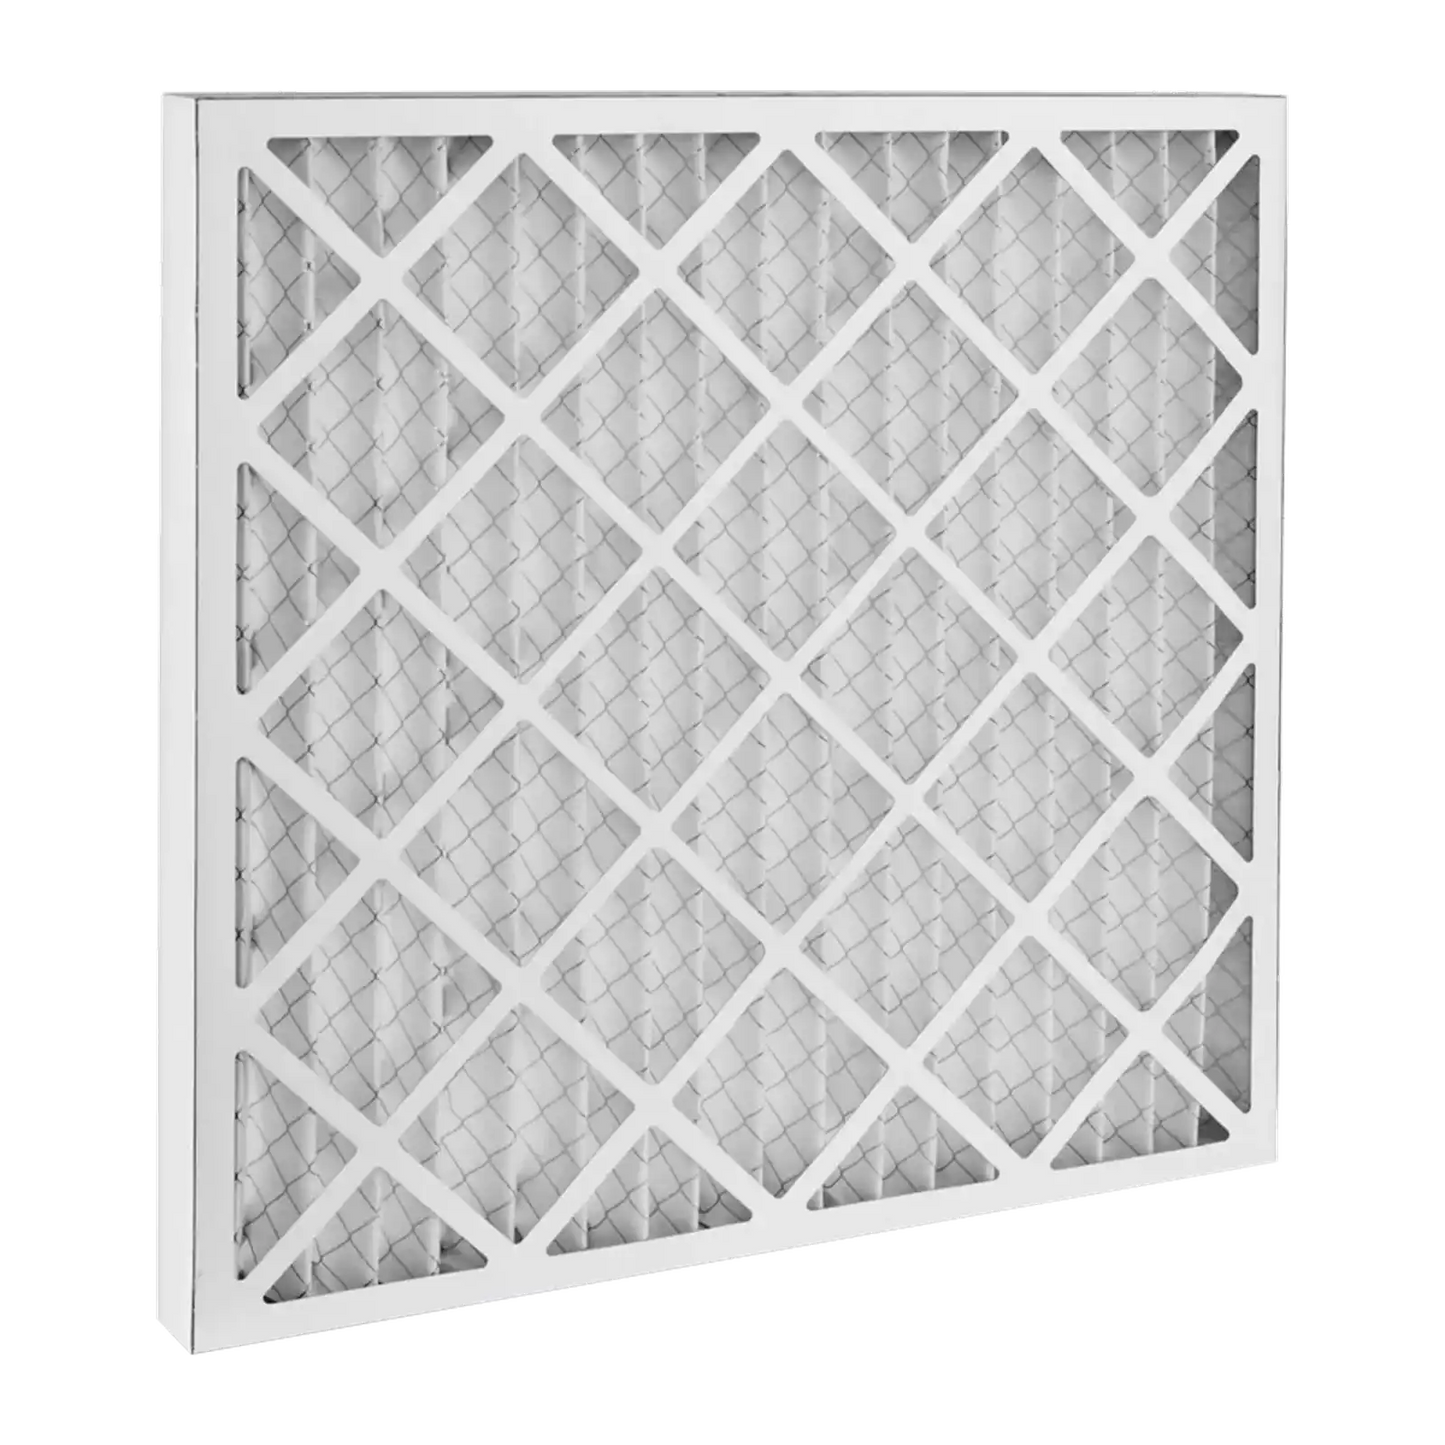 Dafco 25x25x1 Furnace AC Filter - Case of 12